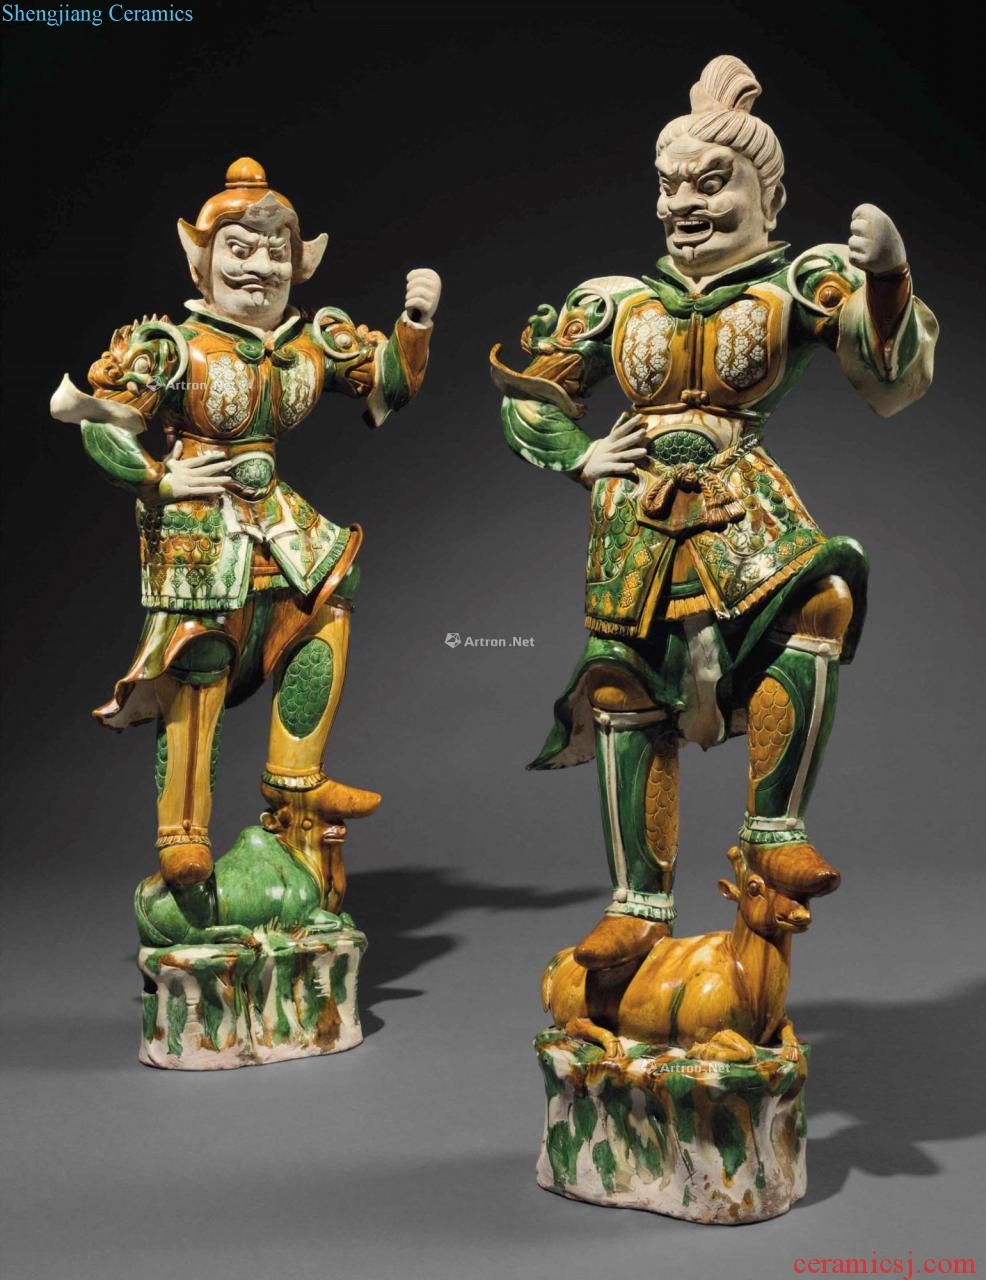 The tang dynasty (618-907), AN EXCEPTIONAL PAIR OF MASSIVE SANCAI - GLAZED POTTERY GUARDIAN FIGURES